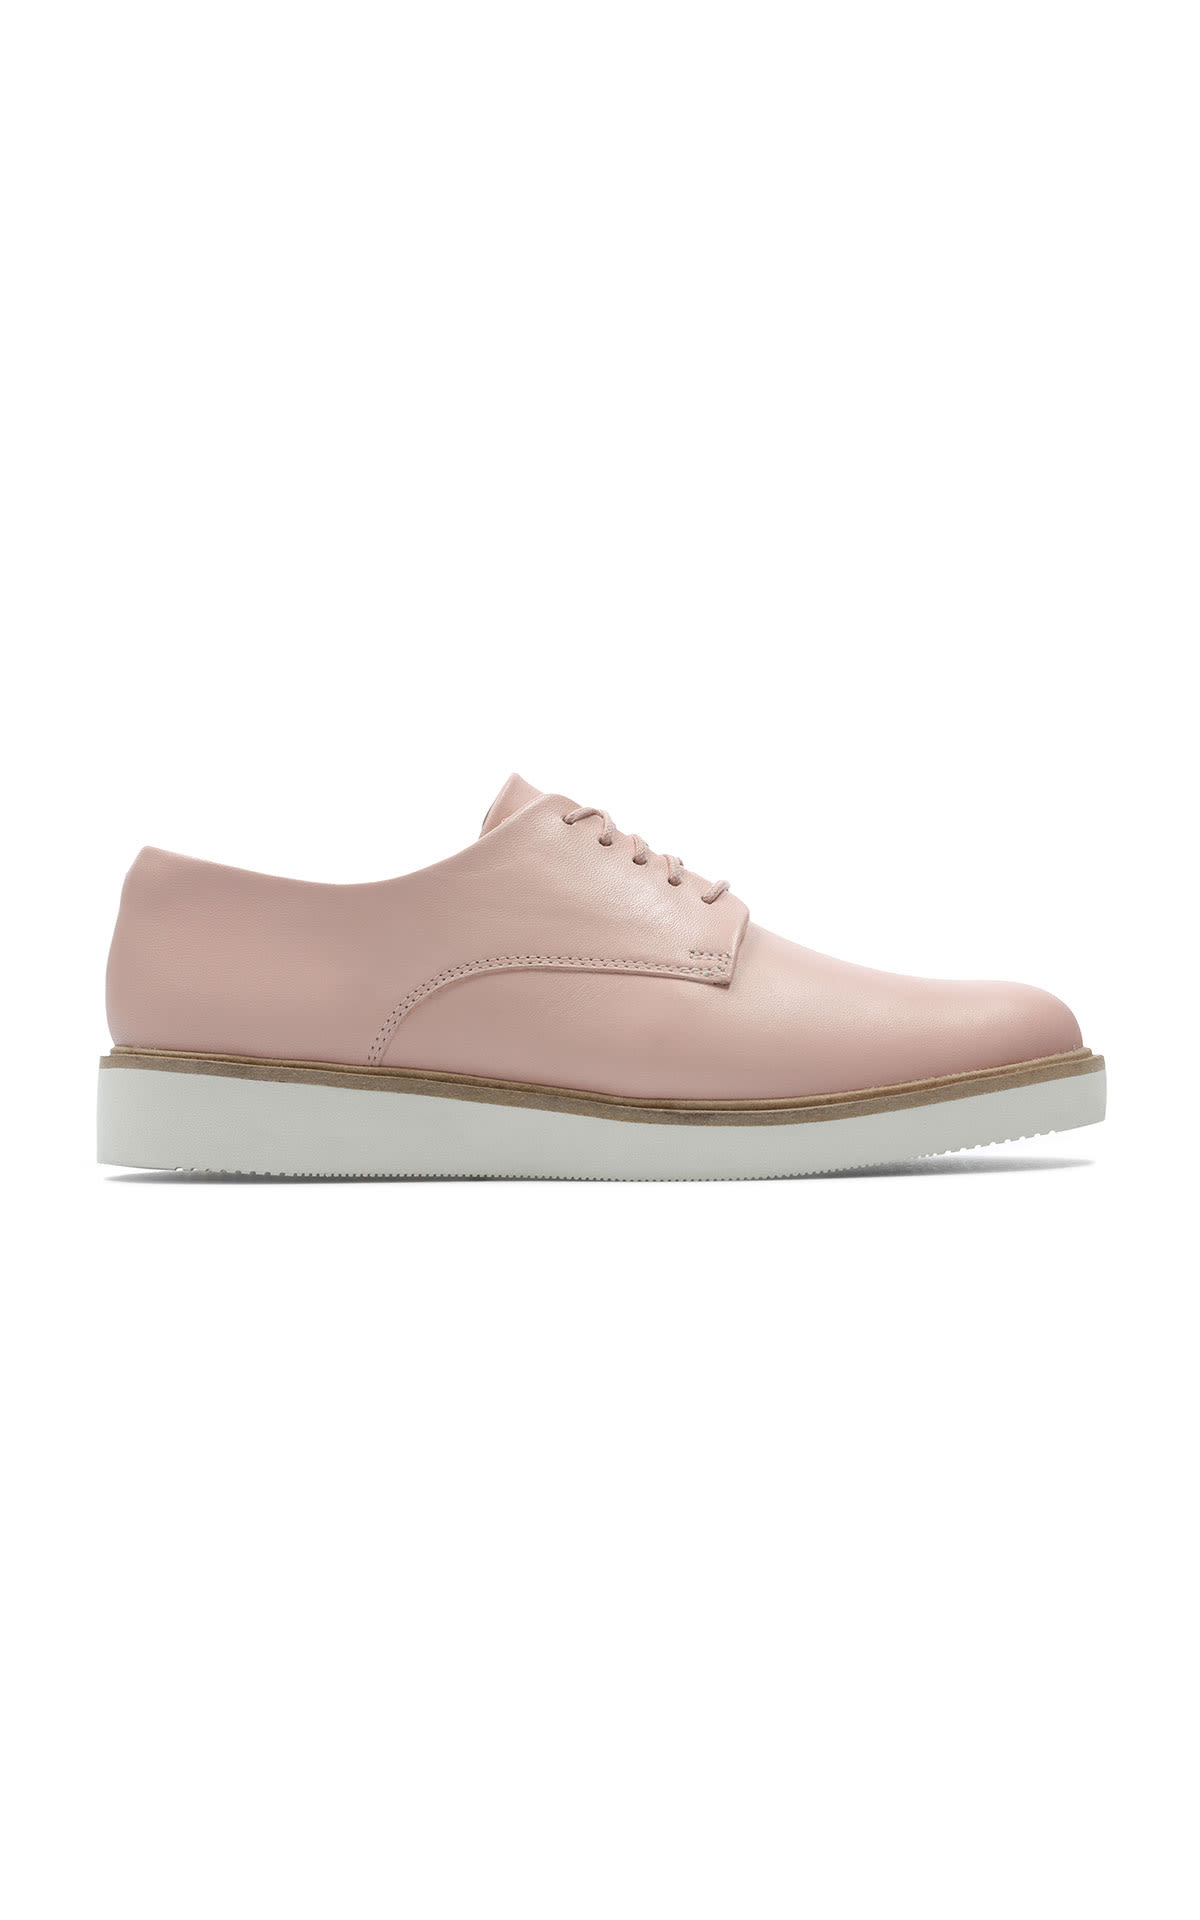 Pink leather Ebaile shoe clarks